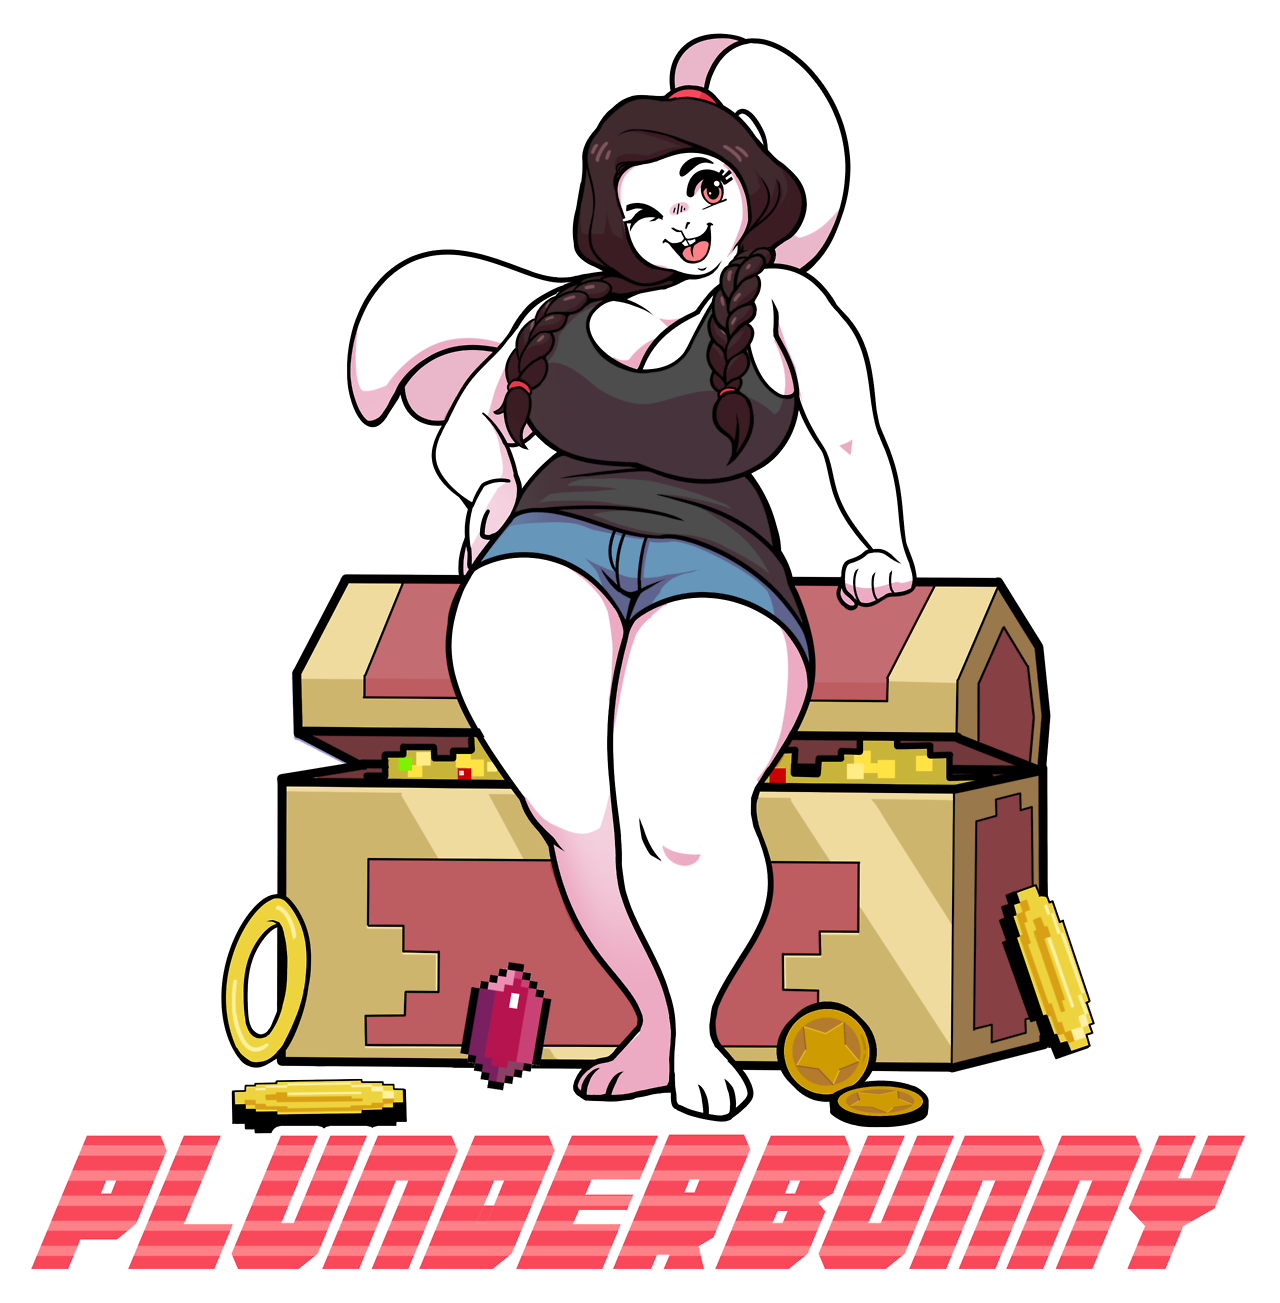 booster-pack-arts:Another commission for @plunderbun. She’s the bomb diggity.